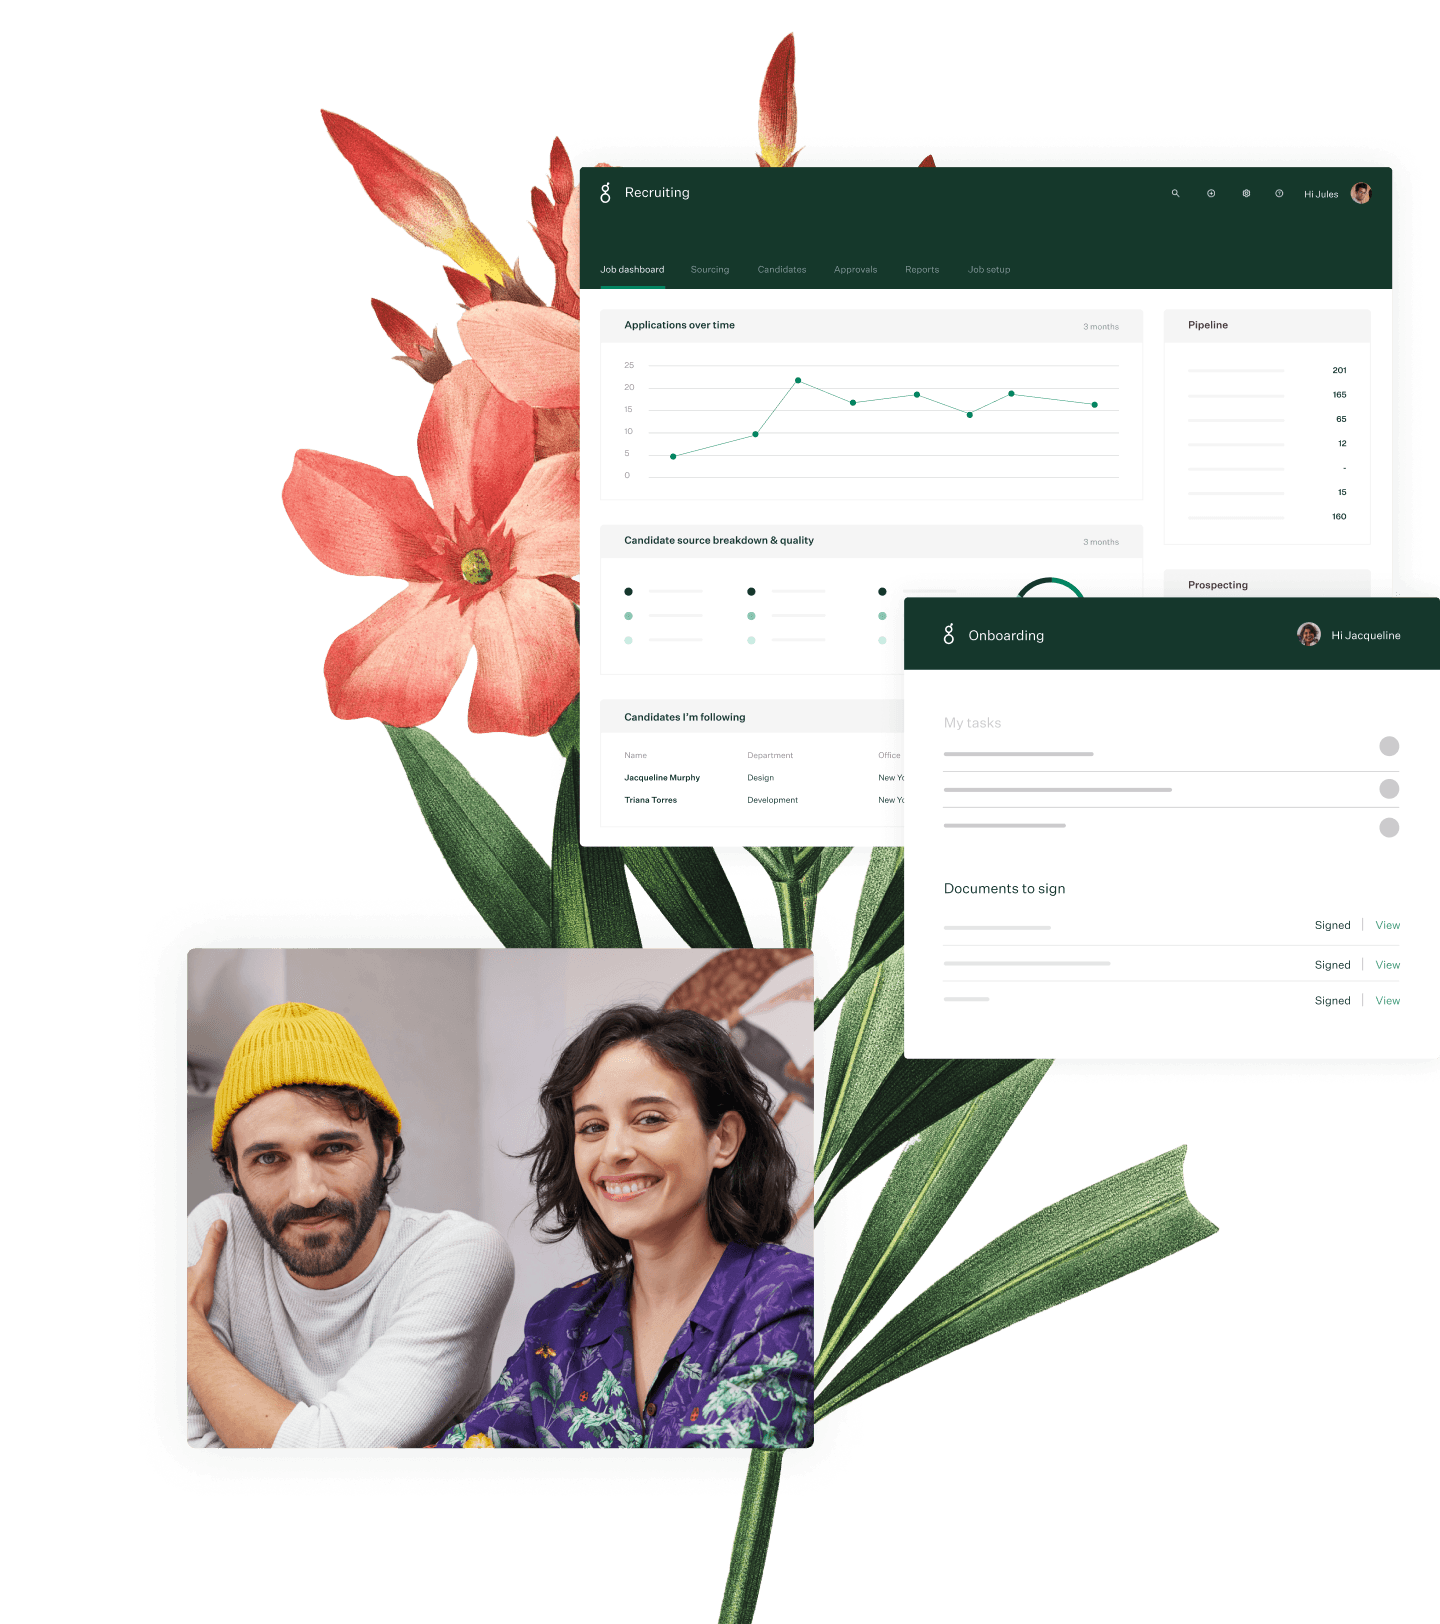 About us company with man and women sitting next to each other over a floral and two Greenhouse UI images